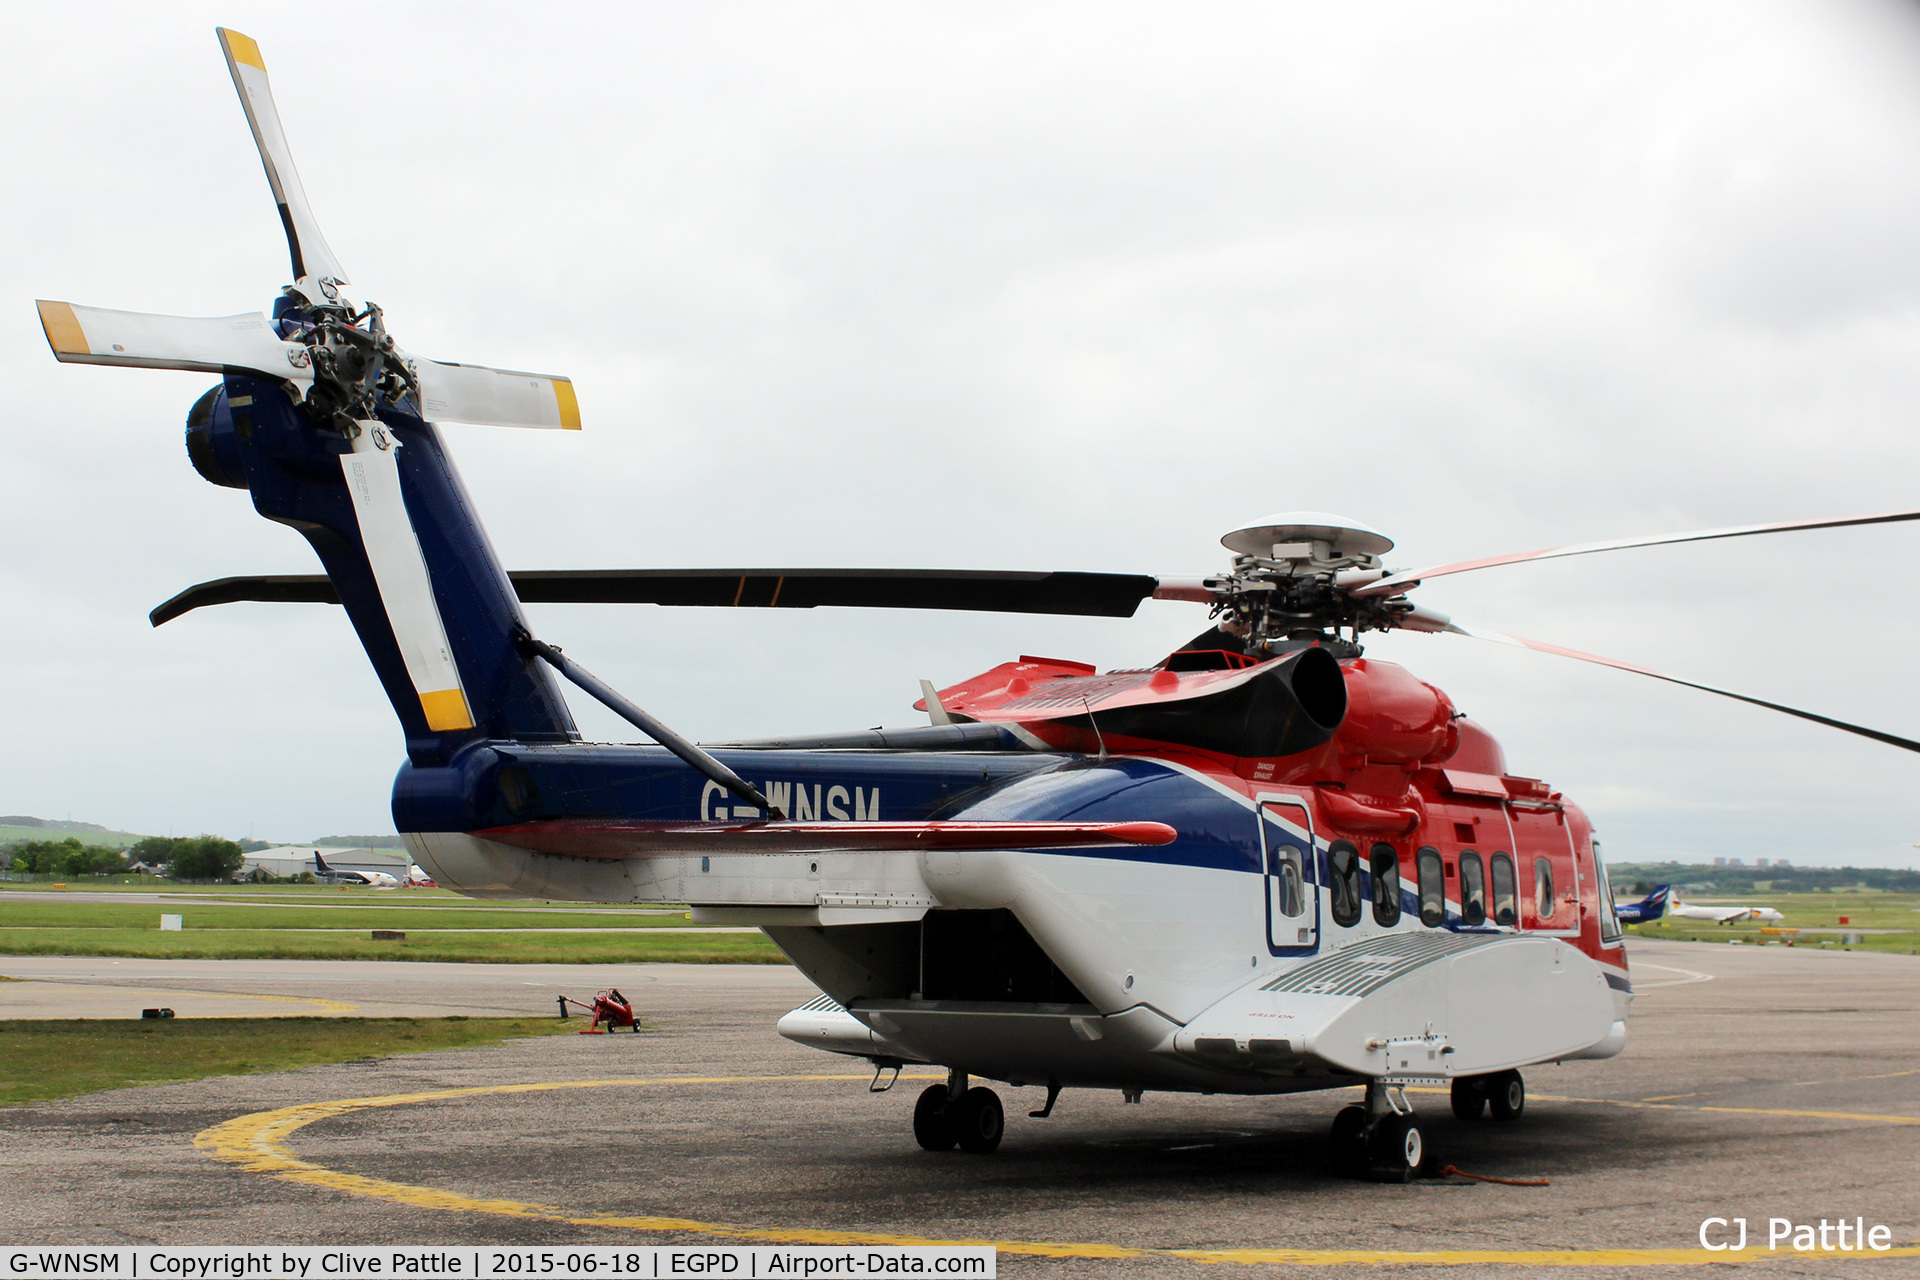 G-WNSM, 2014 Sikorsky S-92A C/N 920237, In action at Aberdeen Airport, Scotland EGPD